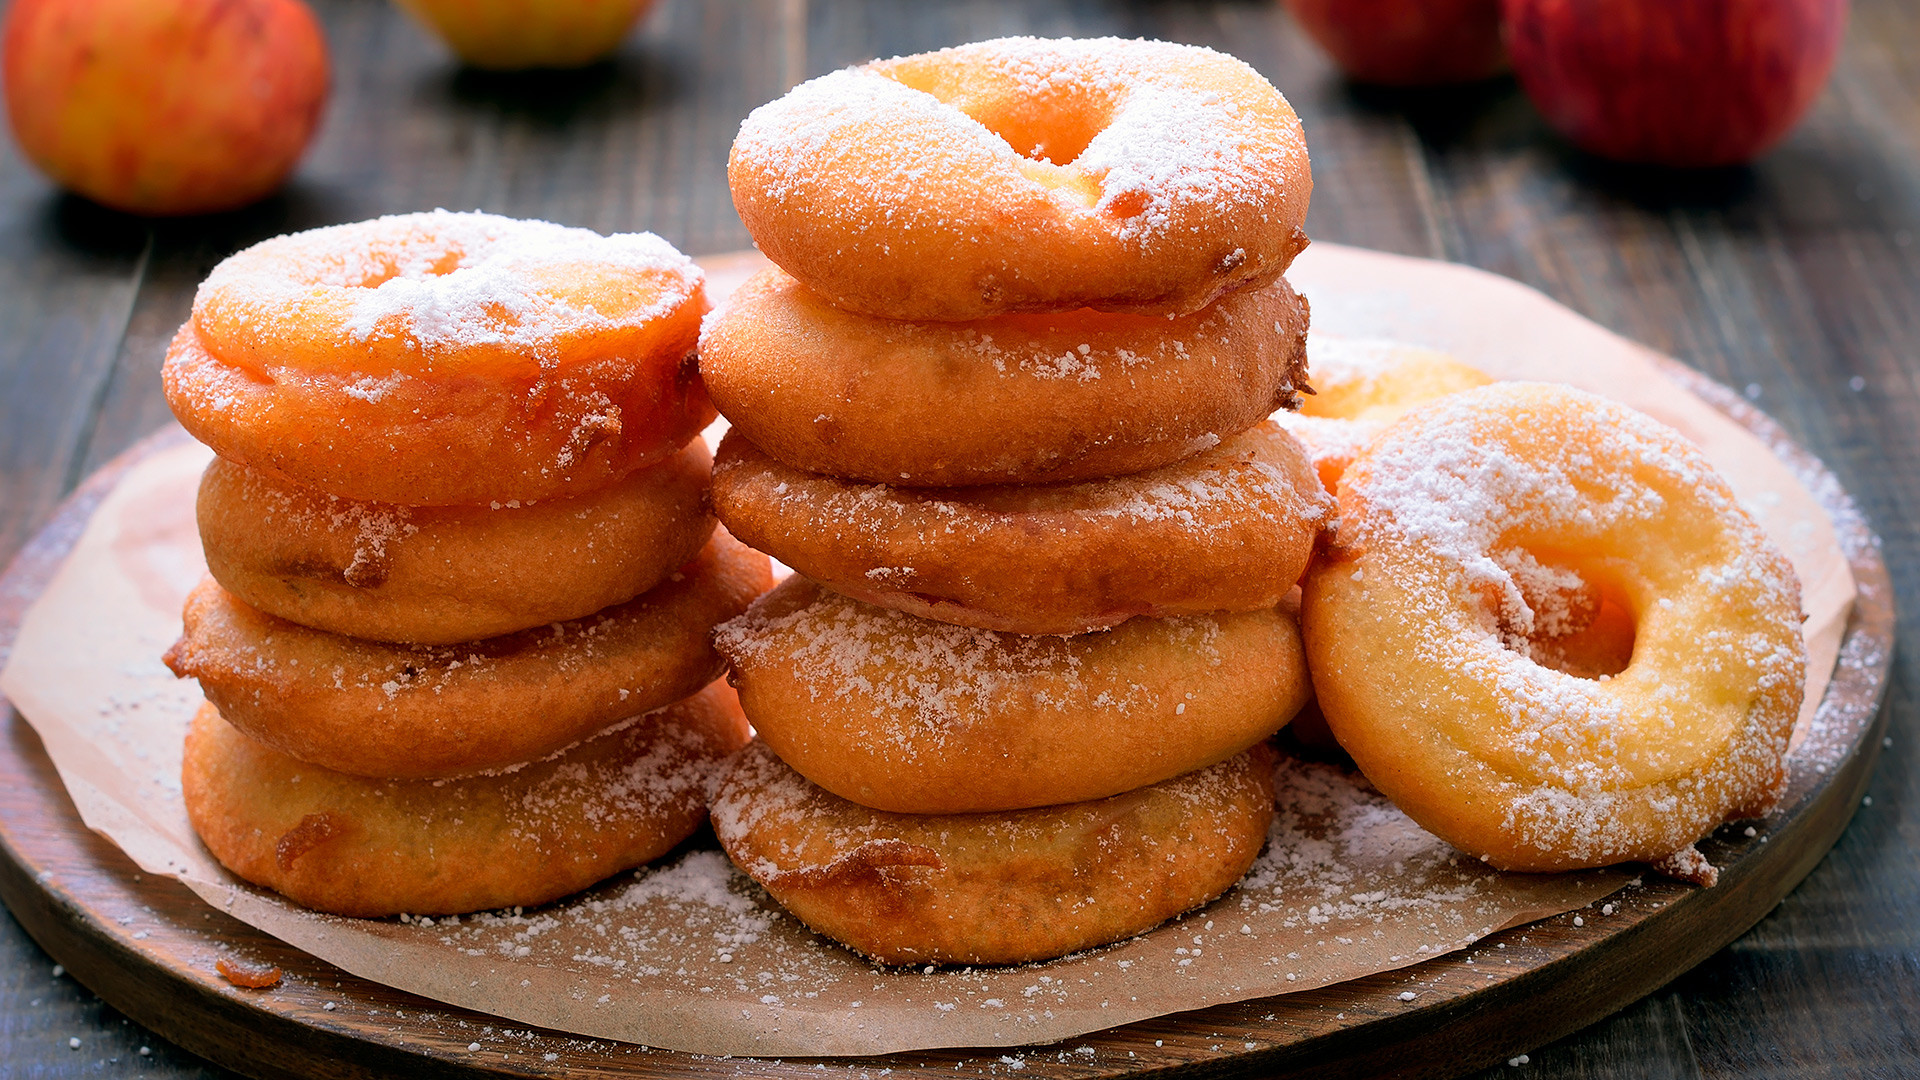 Have you ever try Moscow donuts?